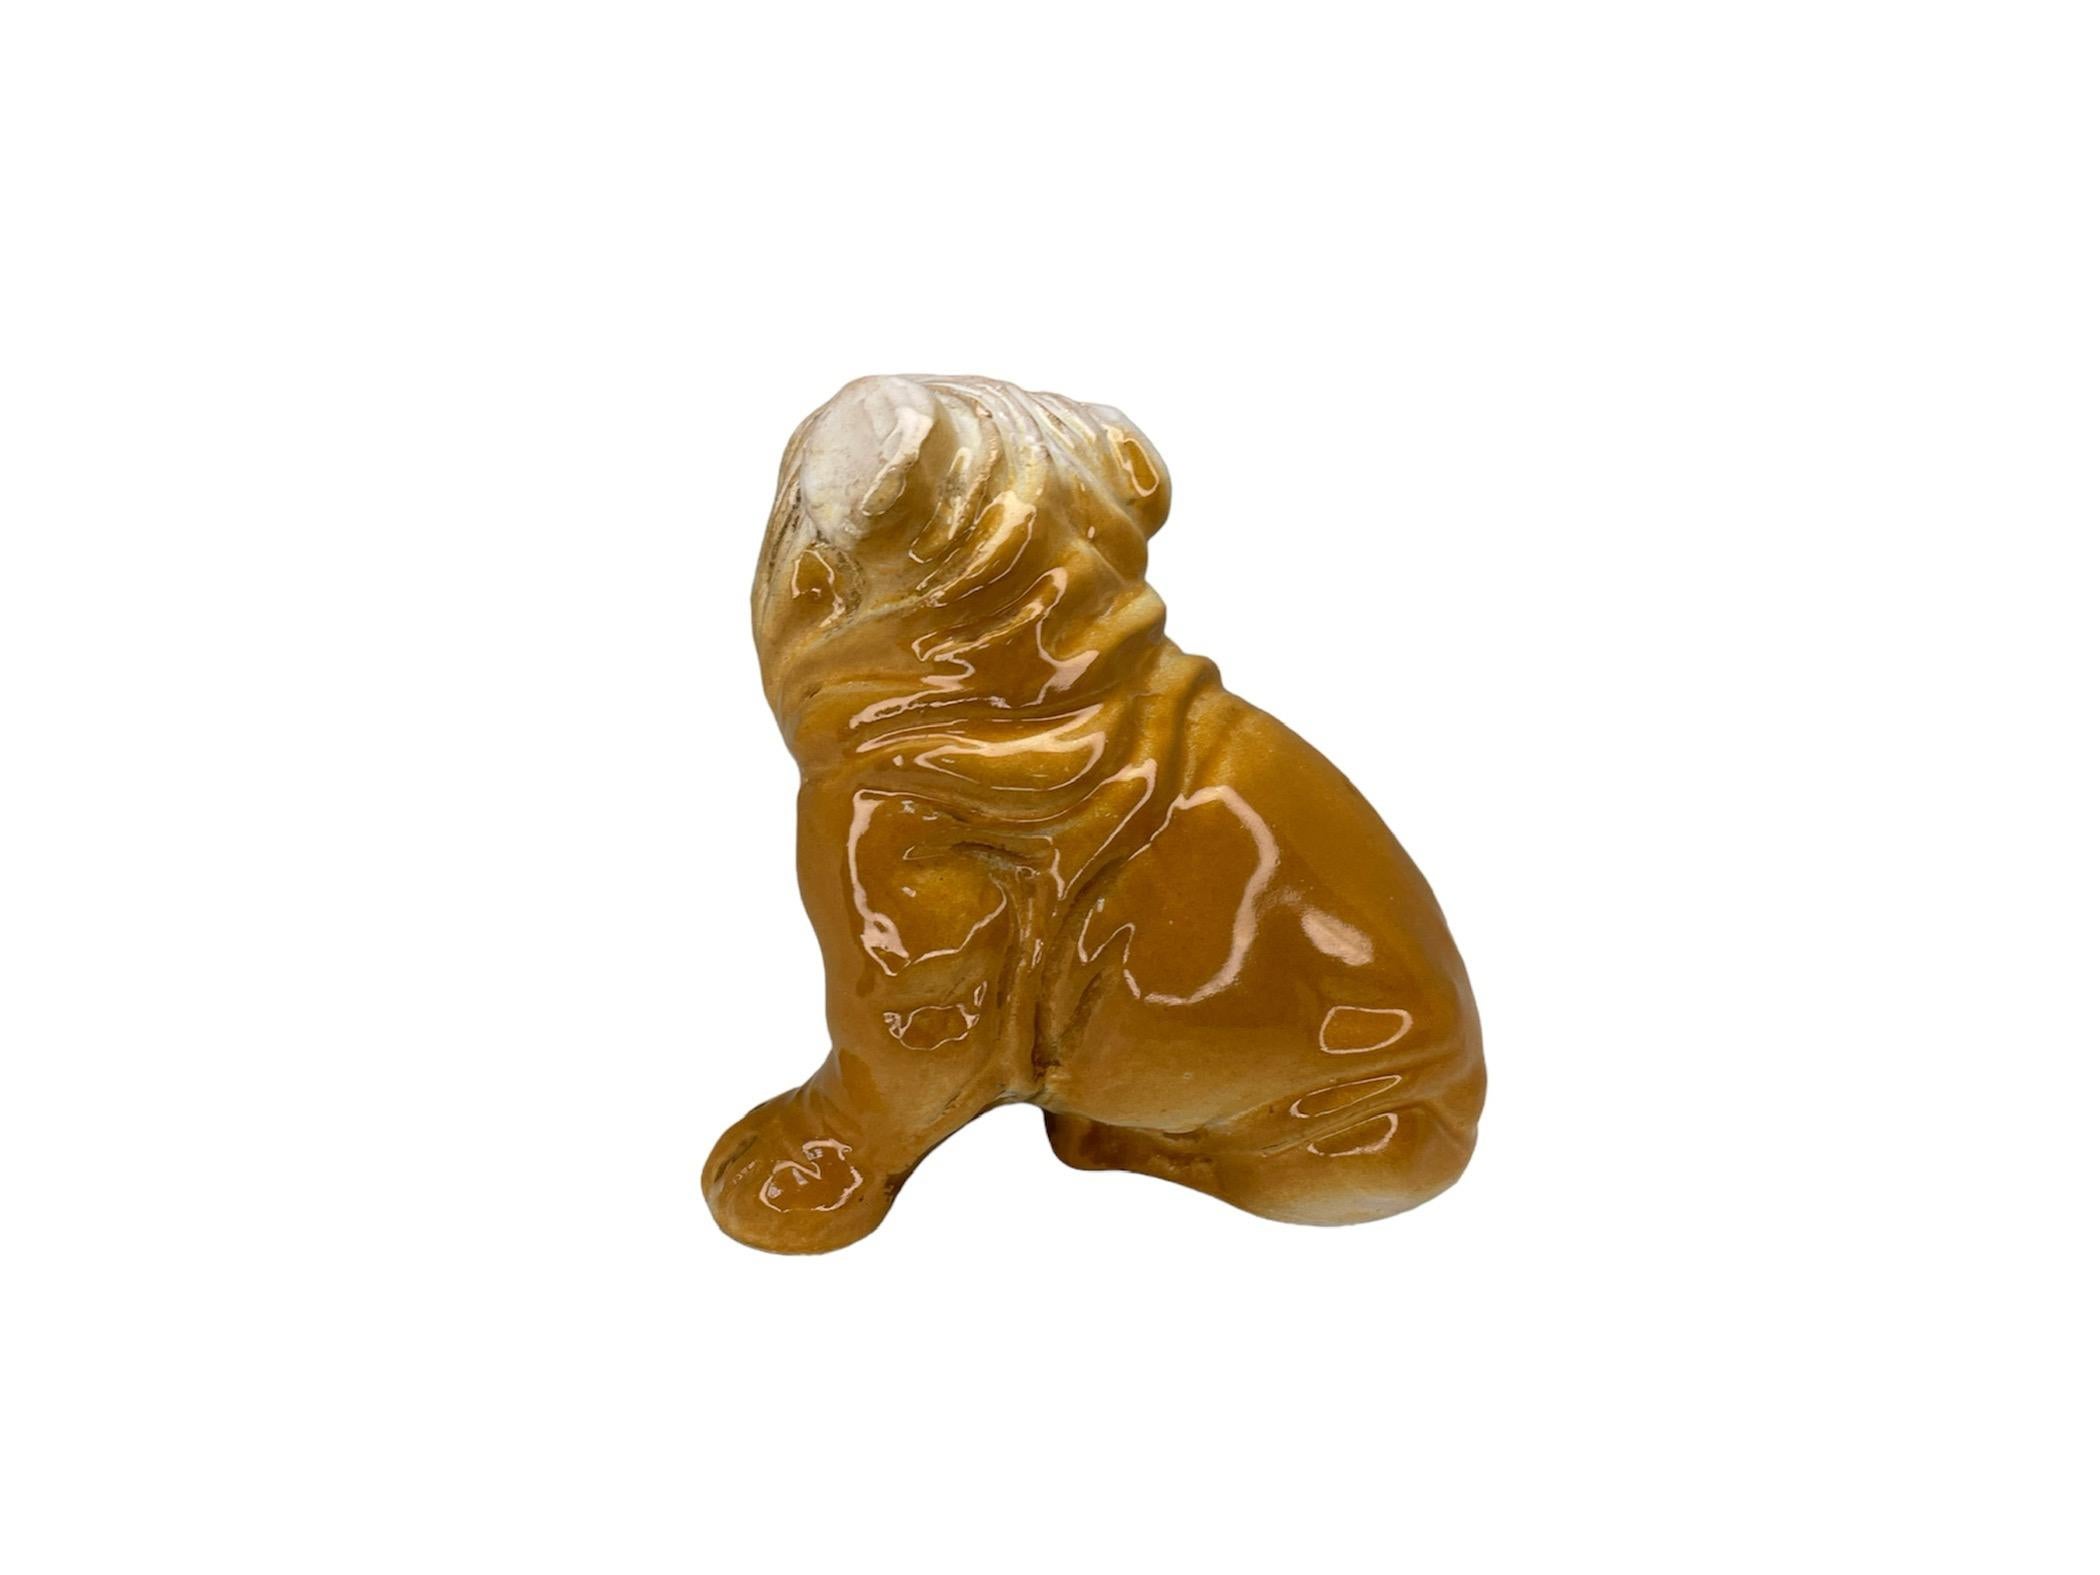 Hand-Painted Ceramic Figurine Of A Bulldog For Sale